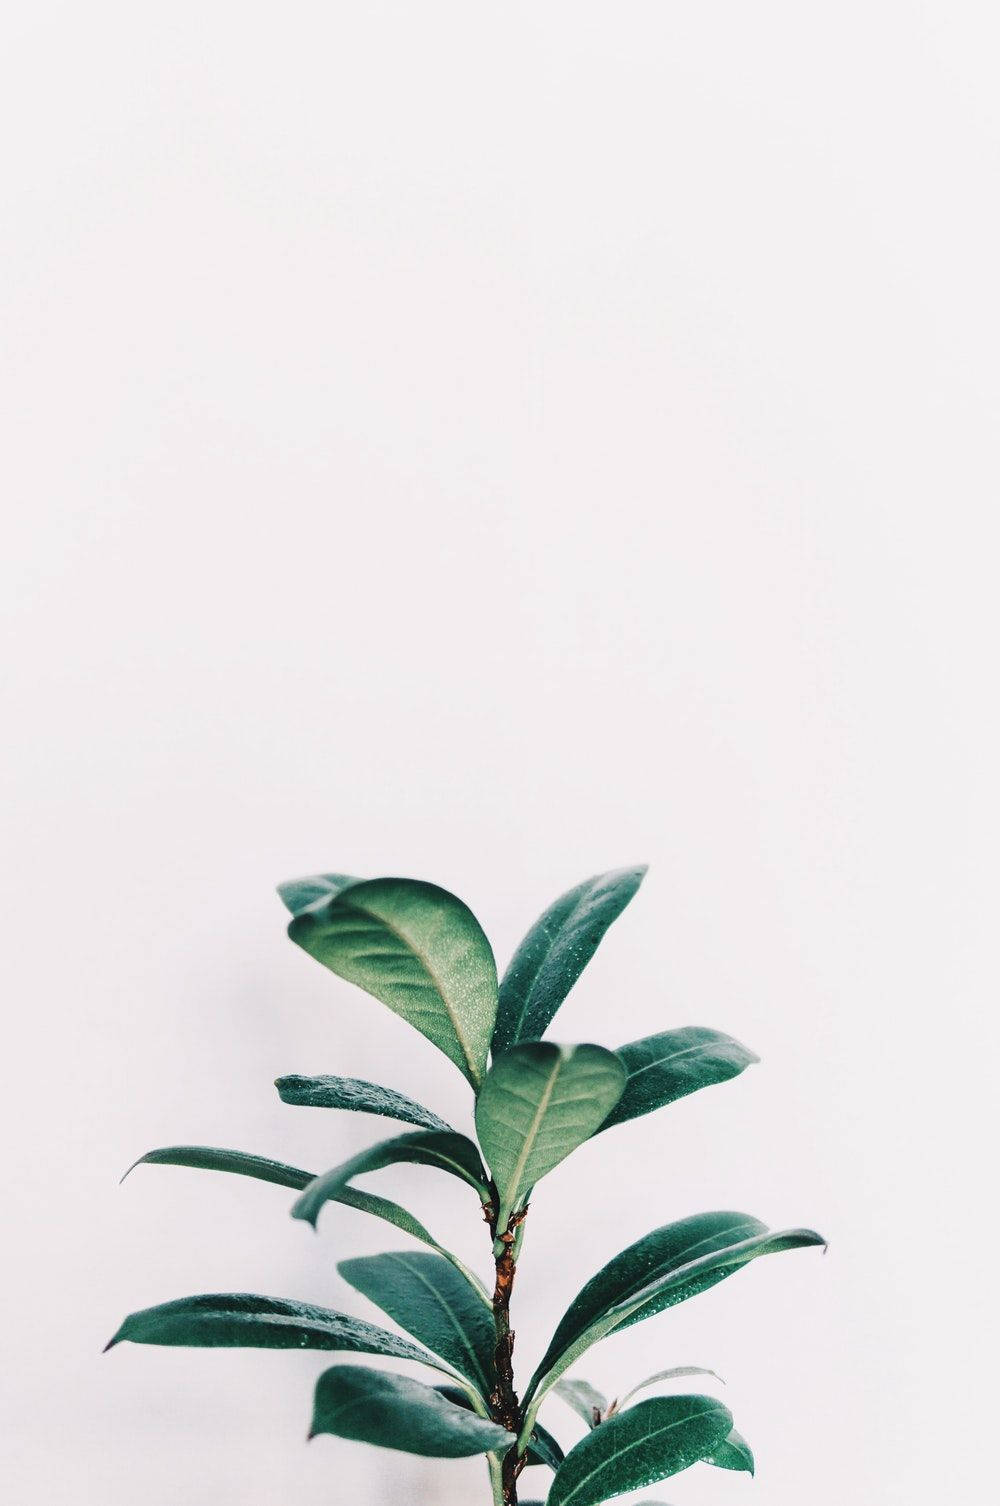 Healthy Plant Green And White Aesthetic Wallpaper